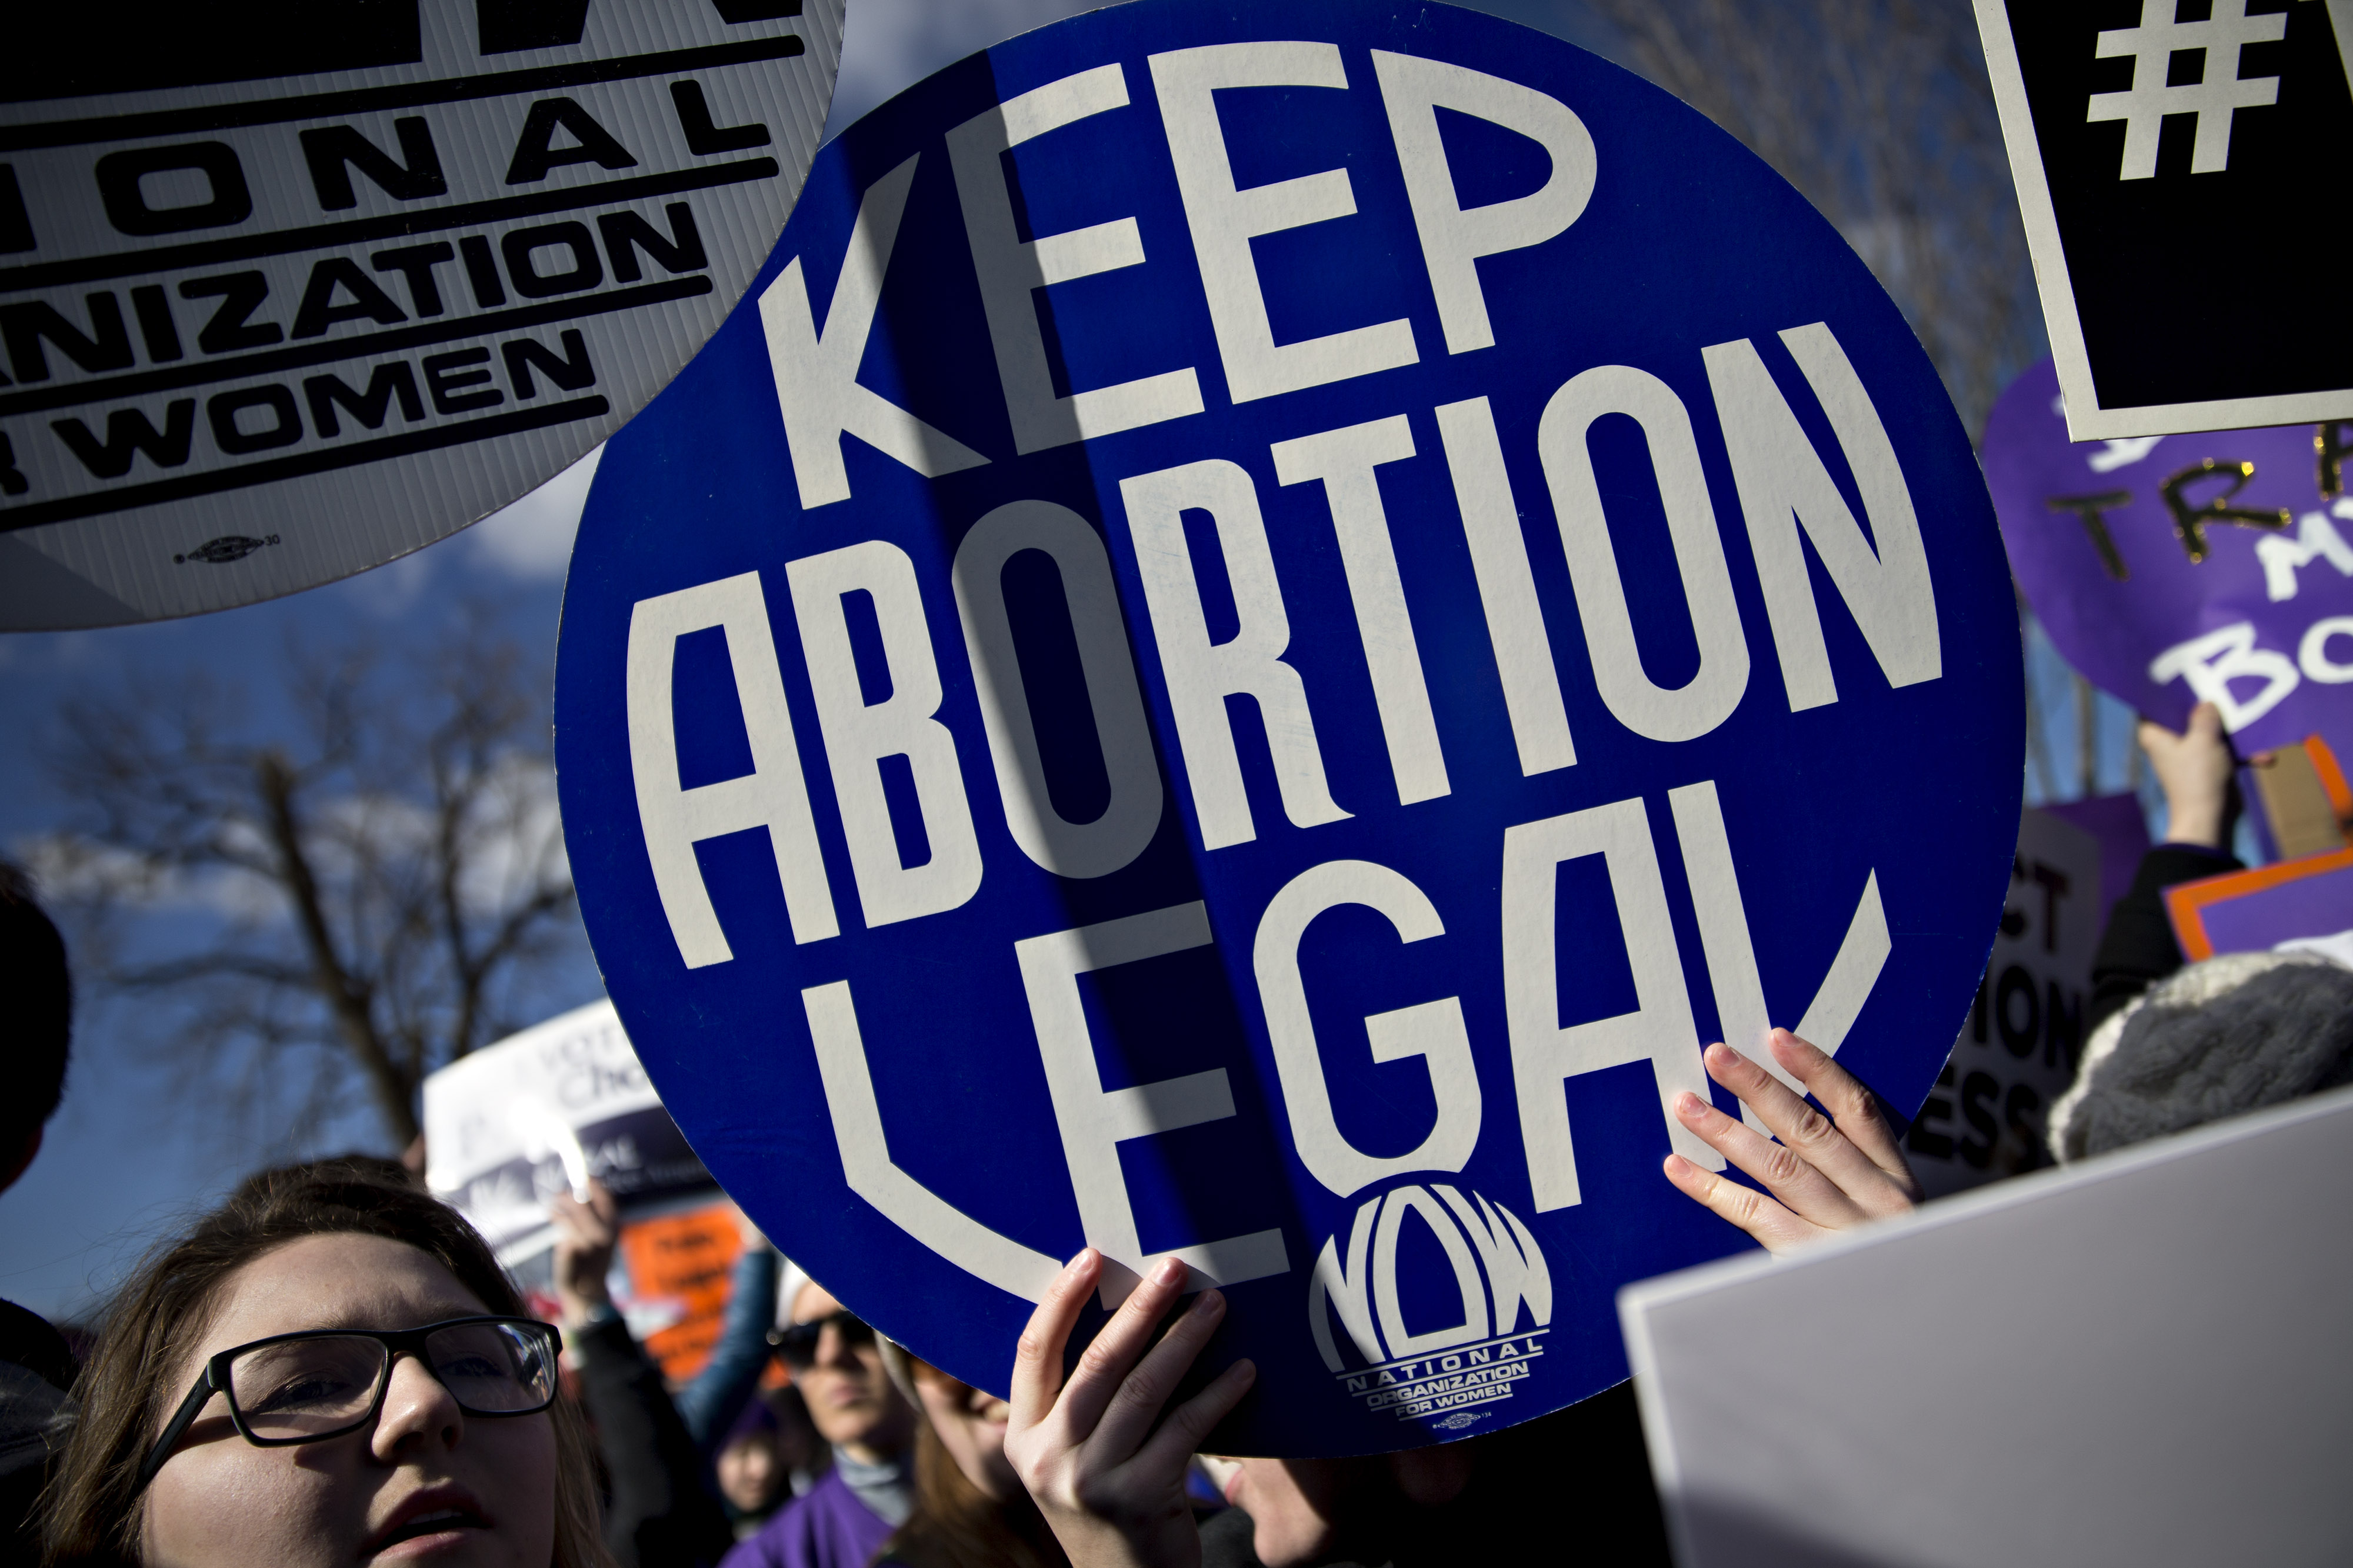 A demonstrator holds up a sign in support of pro-life rights outside the U.S. Supreme Court in Washington, D.C., U.S., on Wednesday, March 2, 2016. (Bloomberg/Getty Images)